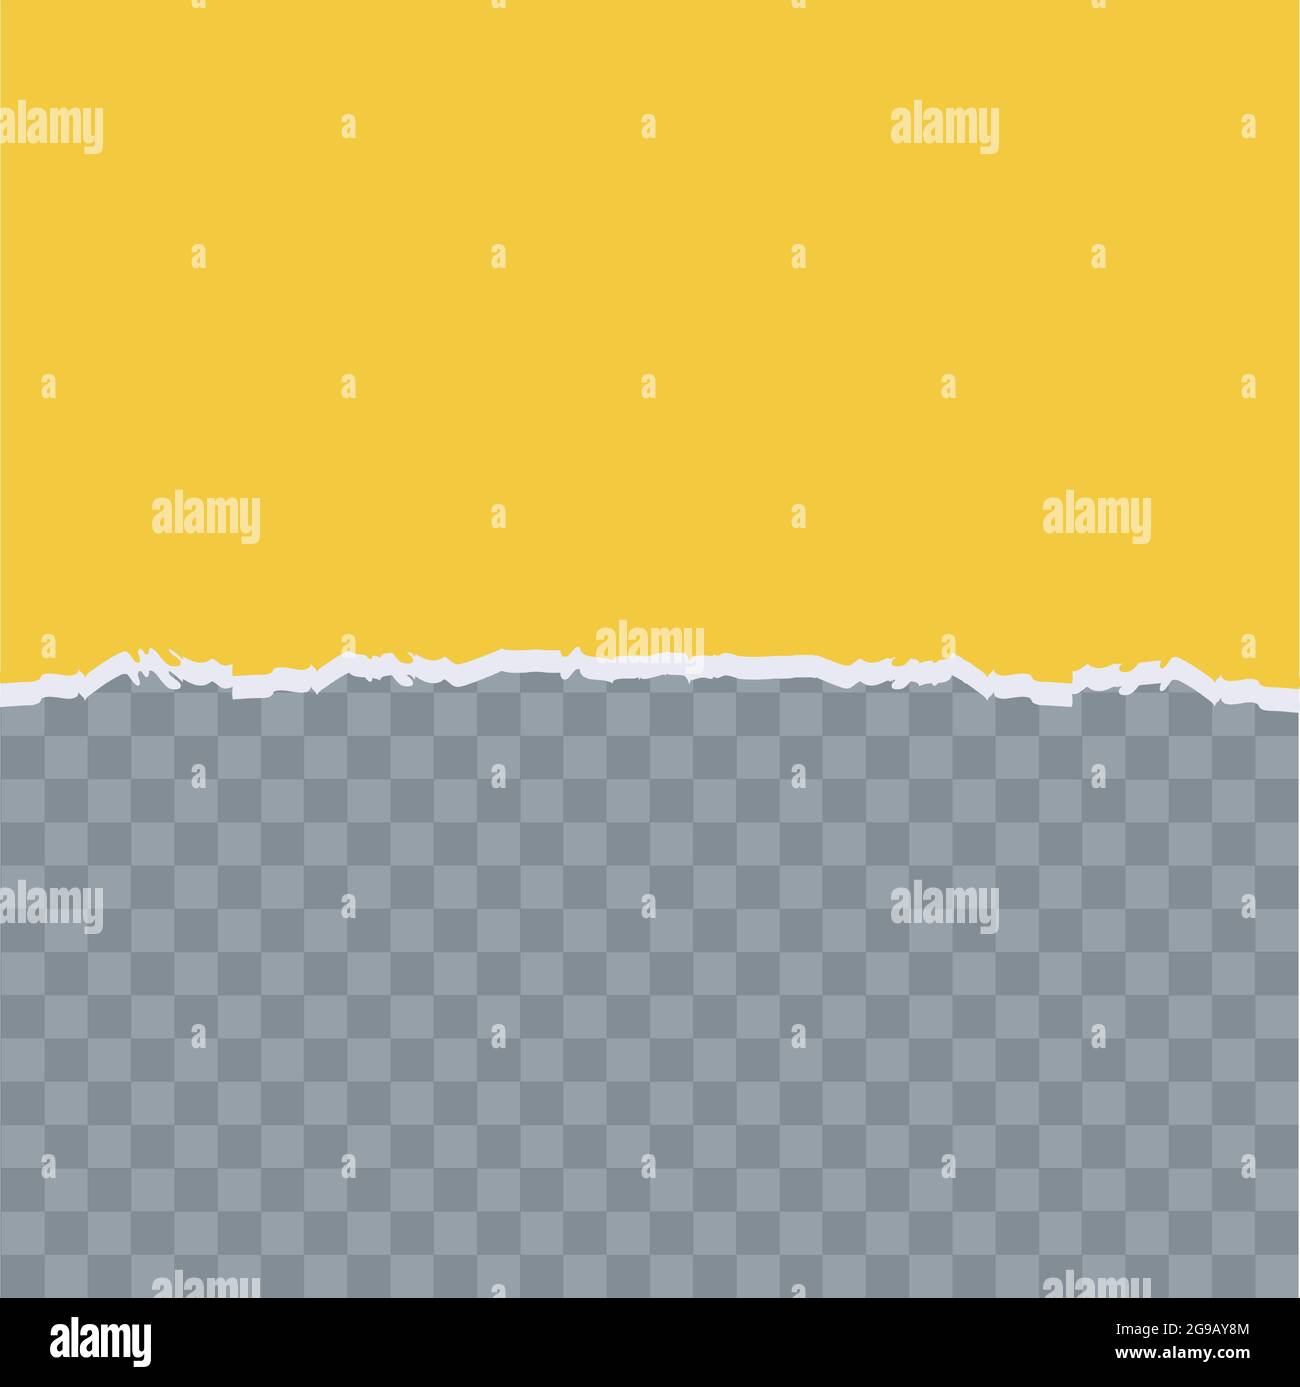 Torn, ripped piece of horizontal yellow paper on grey background for text. Vector illustration. Stock Vector